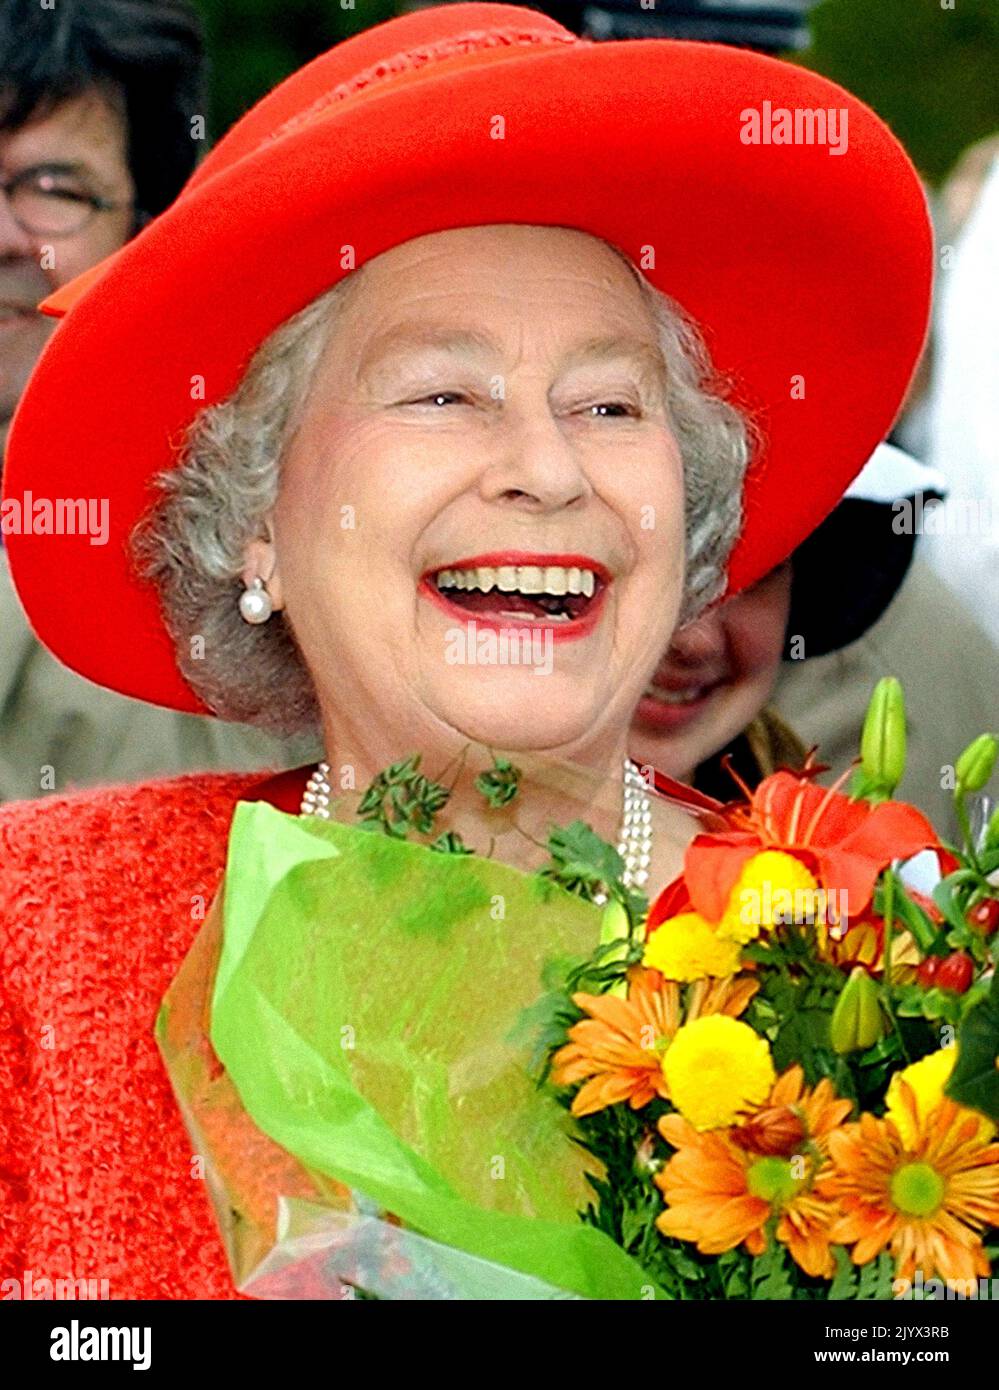 File photo dated 11/10/2002 of Queen Elizabeth II during a walkabout, after visiting the Old Government House in Fredericton, New Brunswick, during her two week Royal visit to Canada. The Queen died peacefully at Balmoral this afternoon, Buckingham Palace has announced. Issue date: Thursday September 8, 2022. Stock Photo